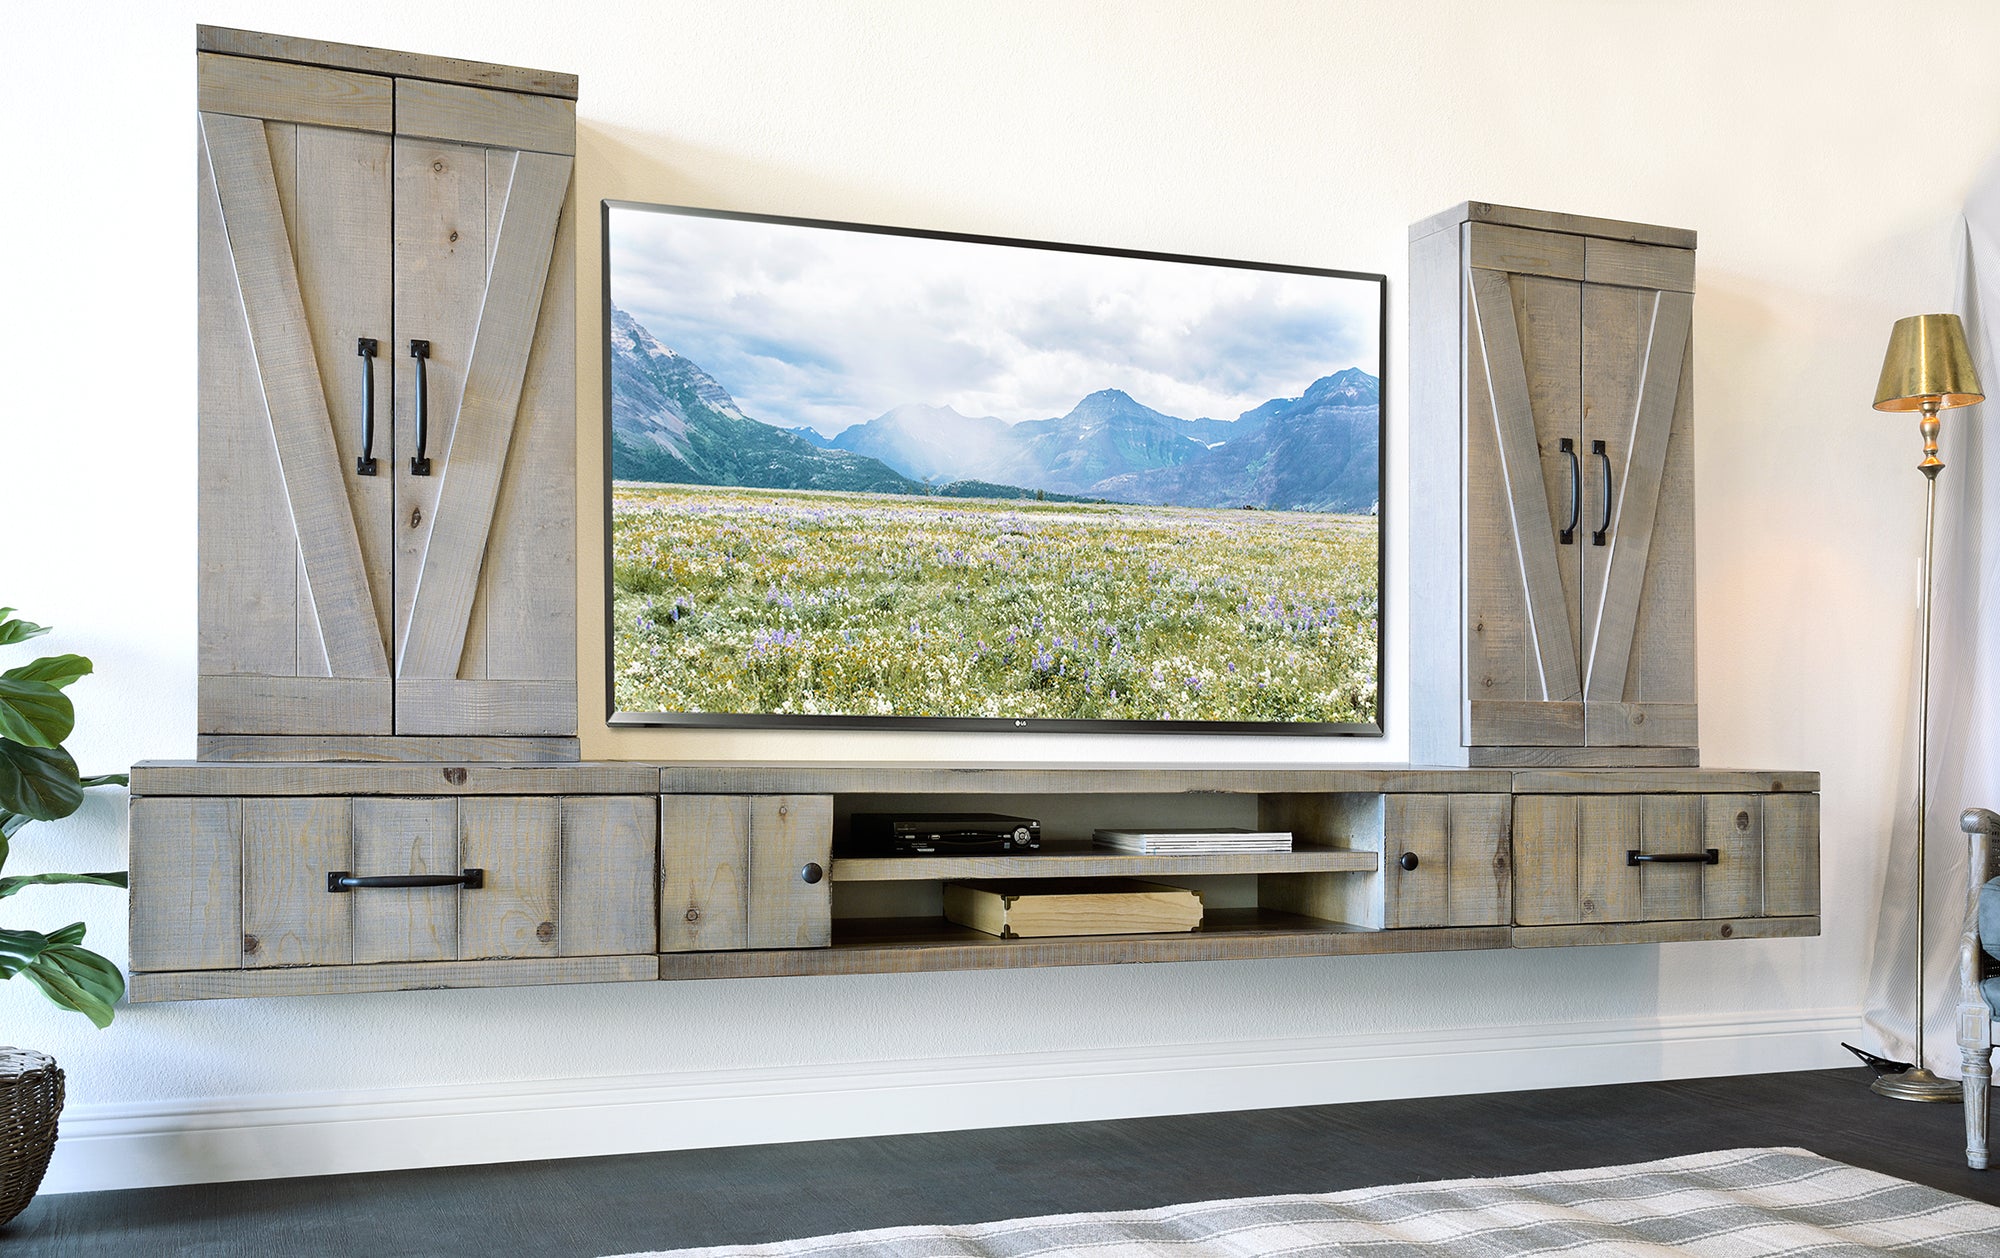 Gray Barn Door Floating TV Stand Wall Mount Entertainment Center - Farmhouse - Lakewood